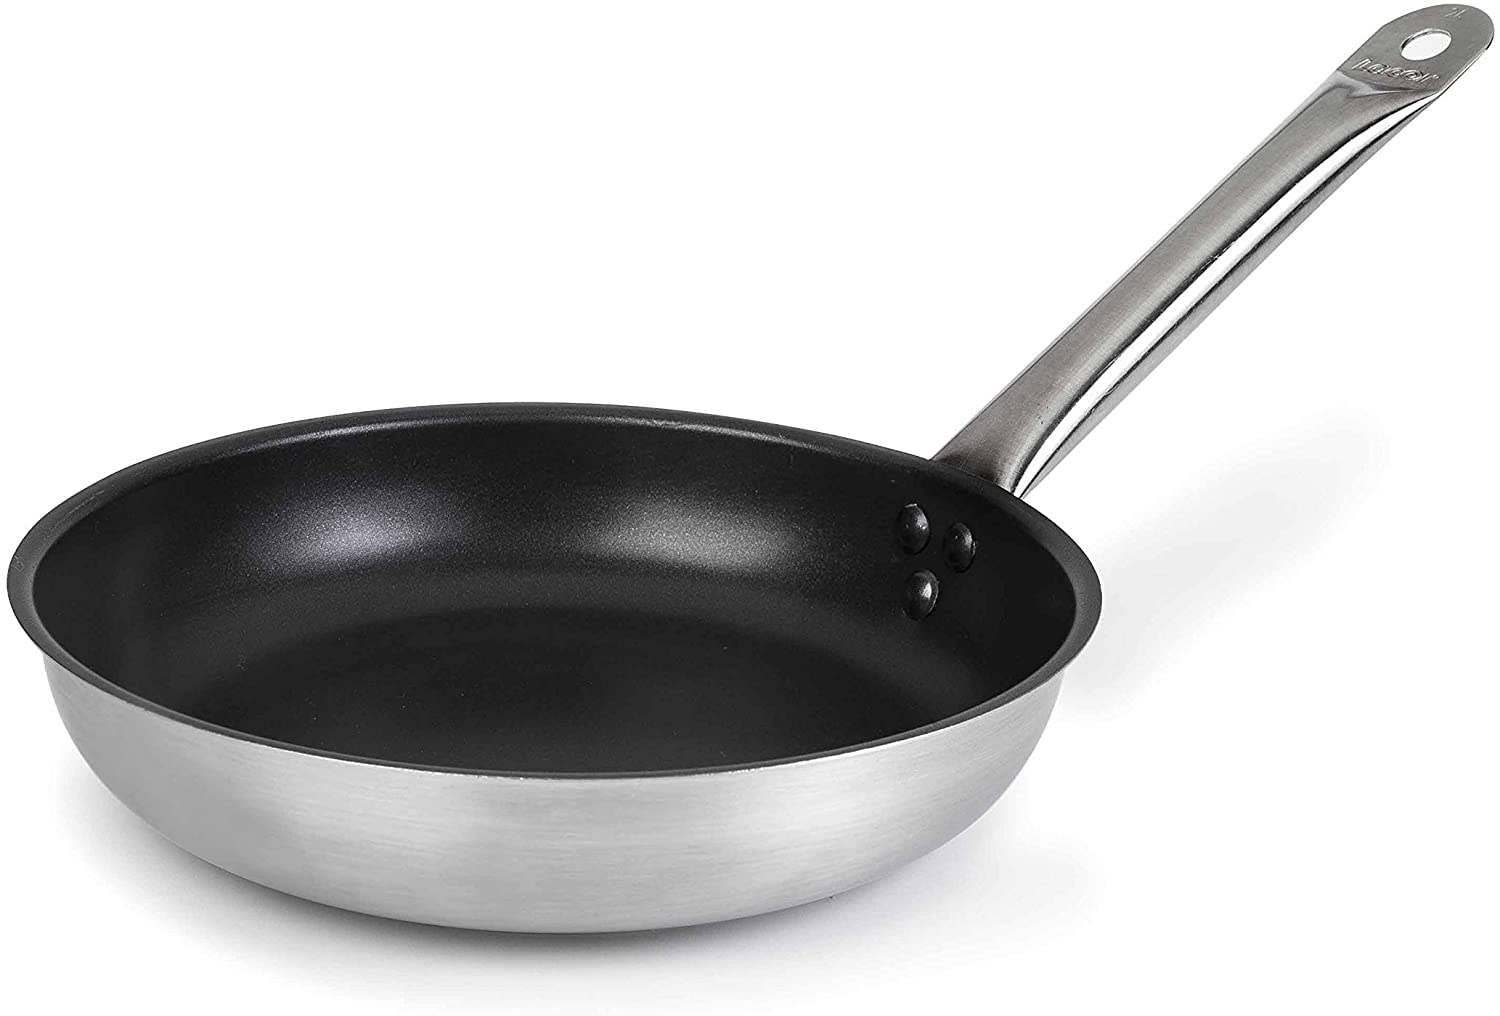 Lacor-51629-NON-STICK FRYING PAN STNL STEEL 28 CMS.